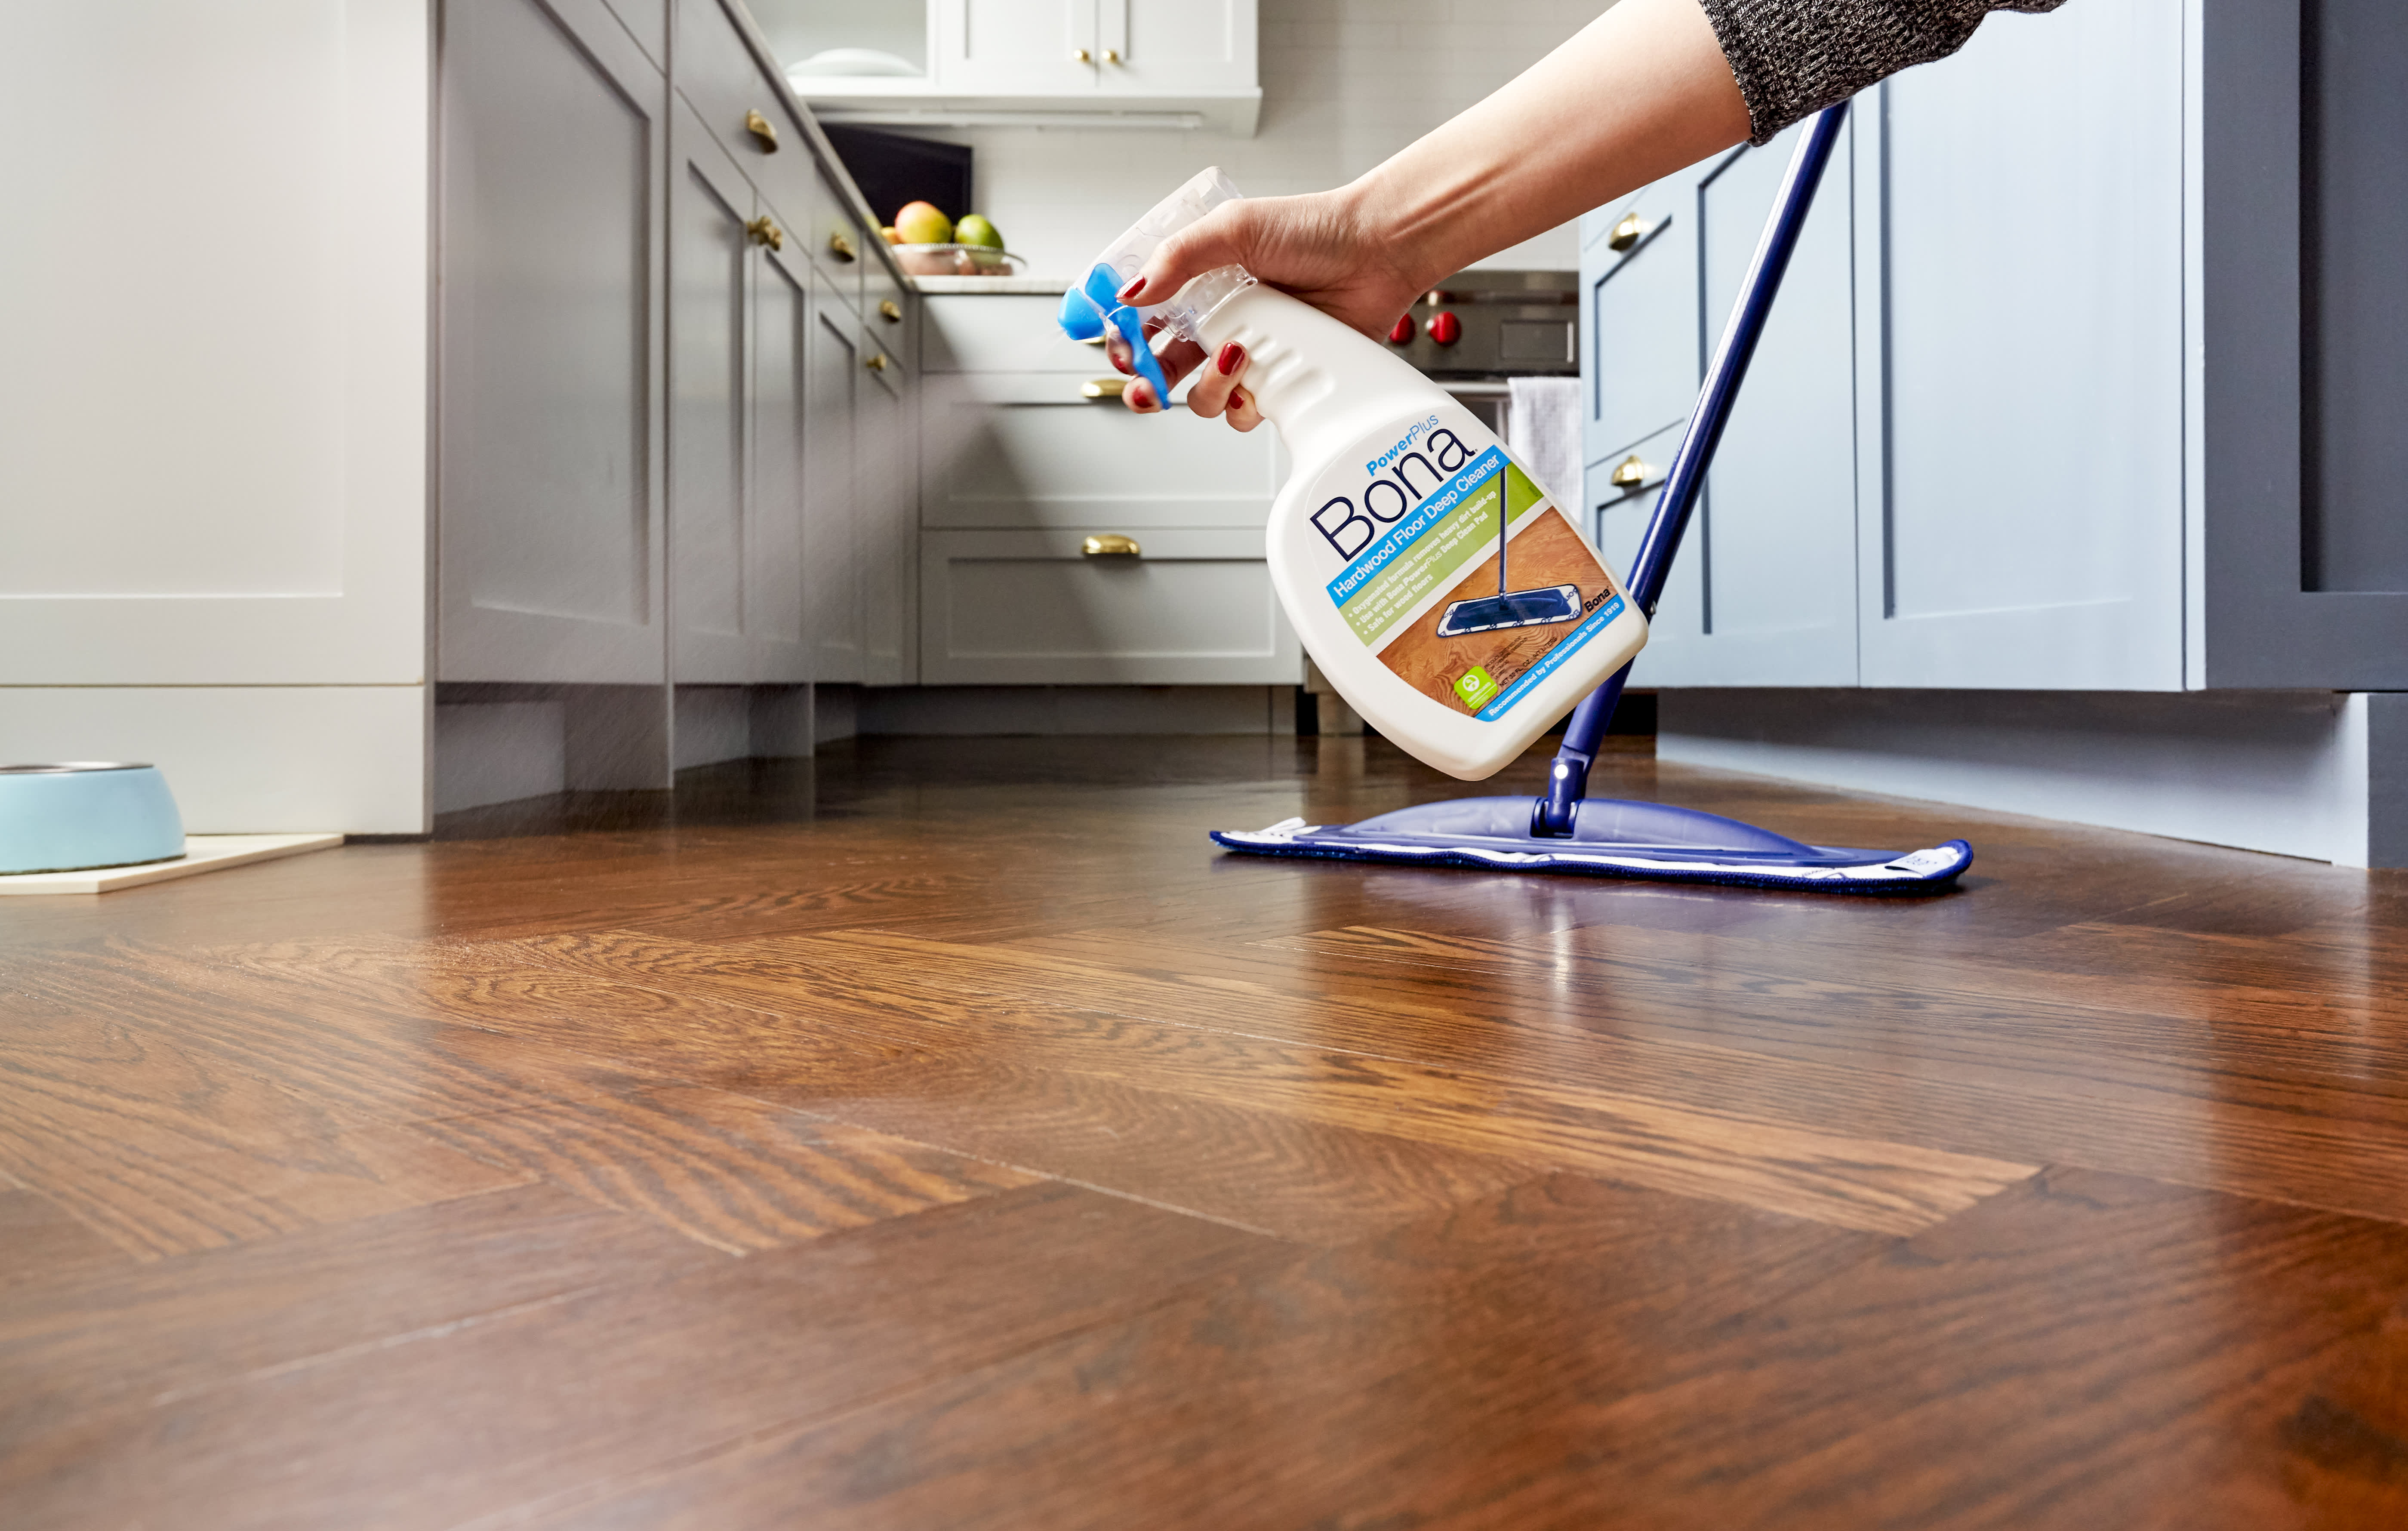 How To Clean Your Hardwood Floors Year Round: A Quick Guide for